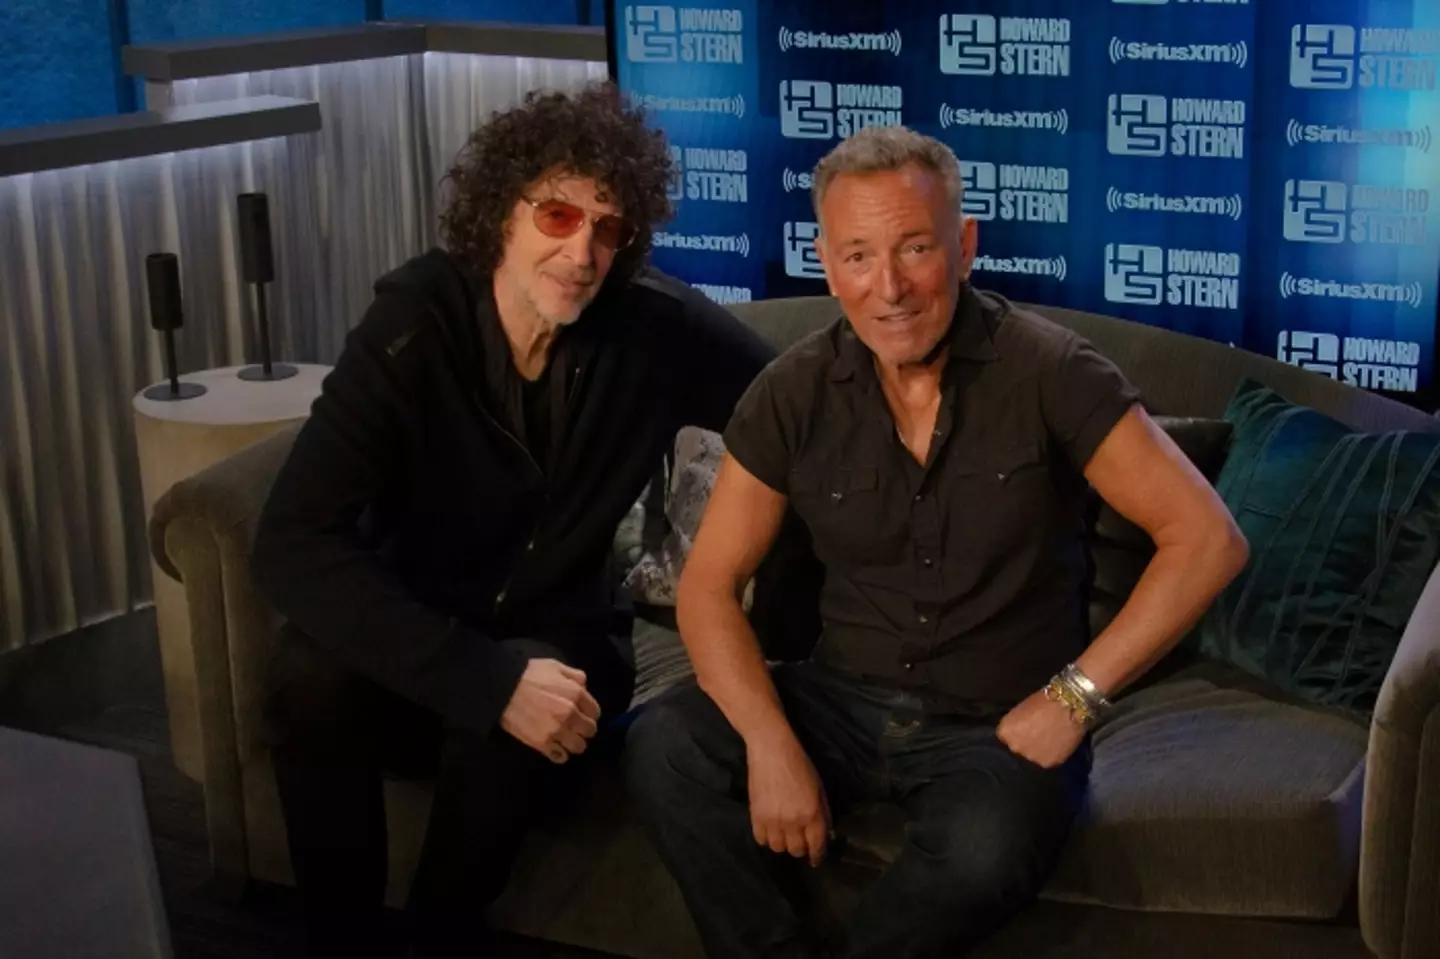 The Howard Stern Show is a favourite of celebrities.